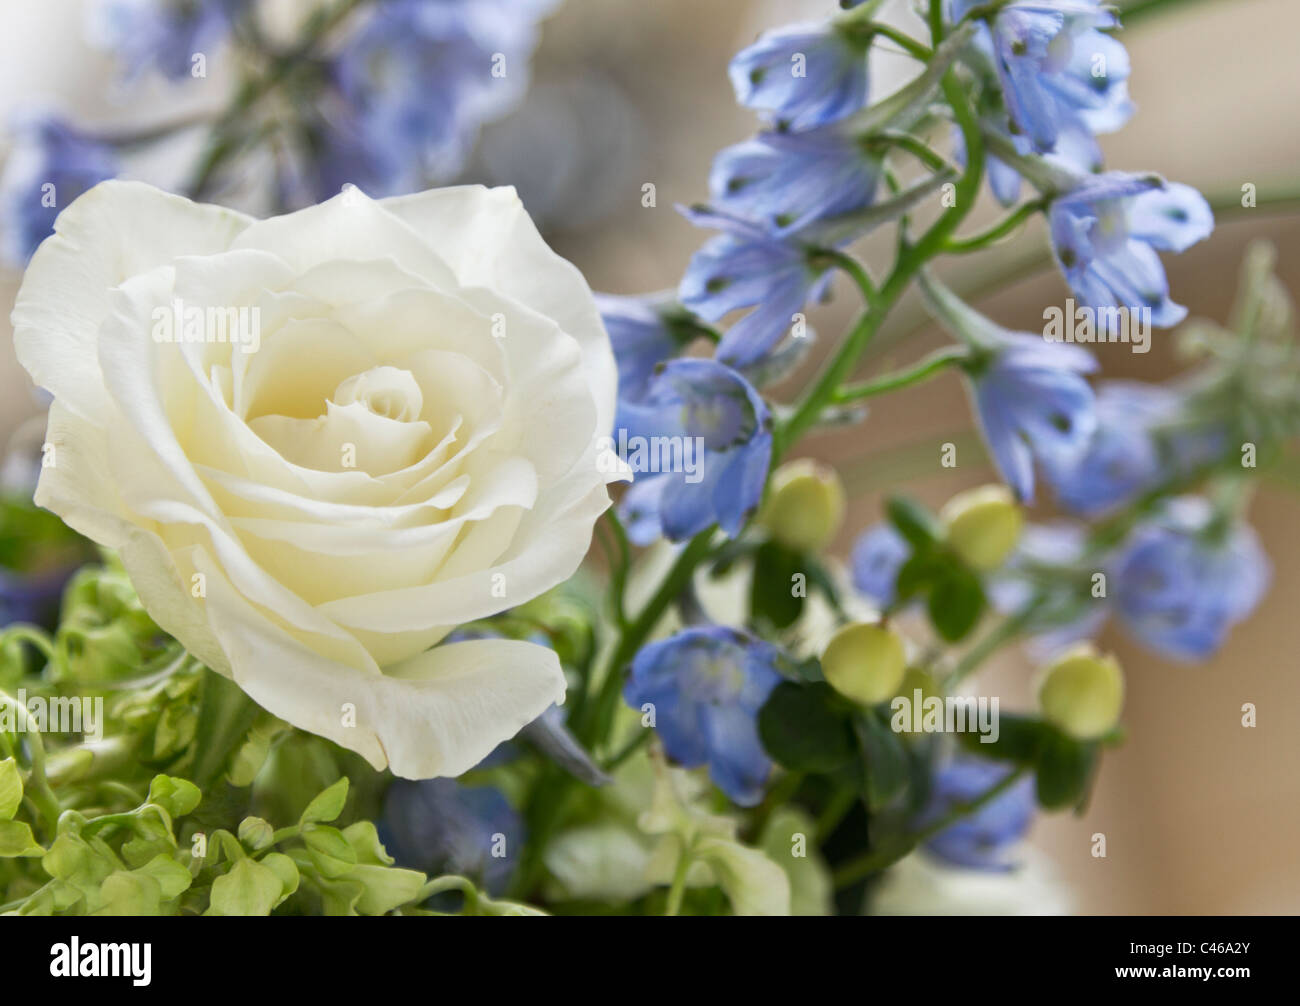 Selective focus on a single white rose blossom, clean and exquisite, surrounded by floral greens and blues. Stock Photo